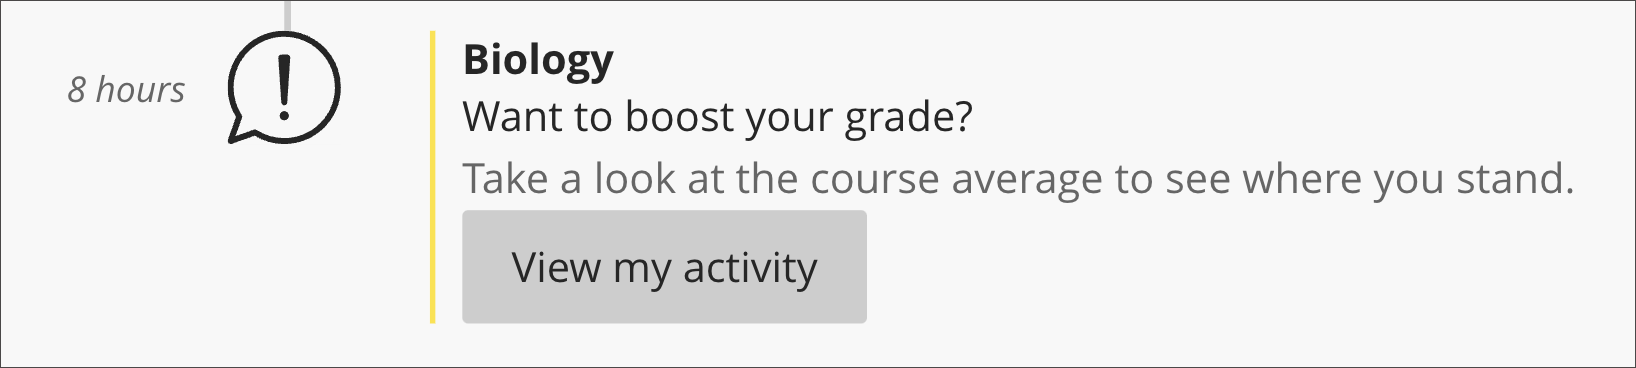 Image of an activity stream notification recommending that a student boost their grade